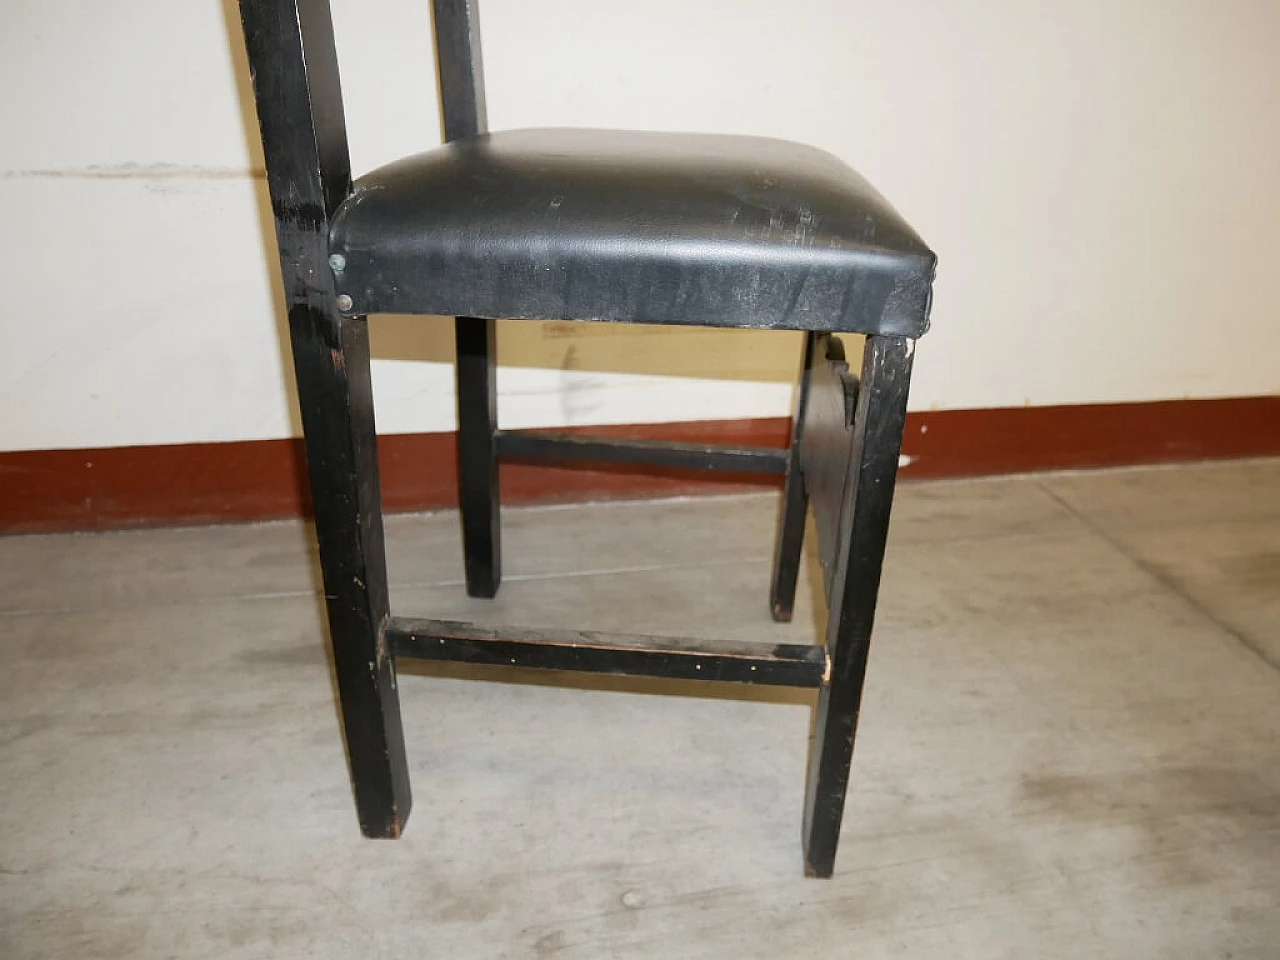 6 Renaissance-style chairs in black-stained wood, 1930s 1375421